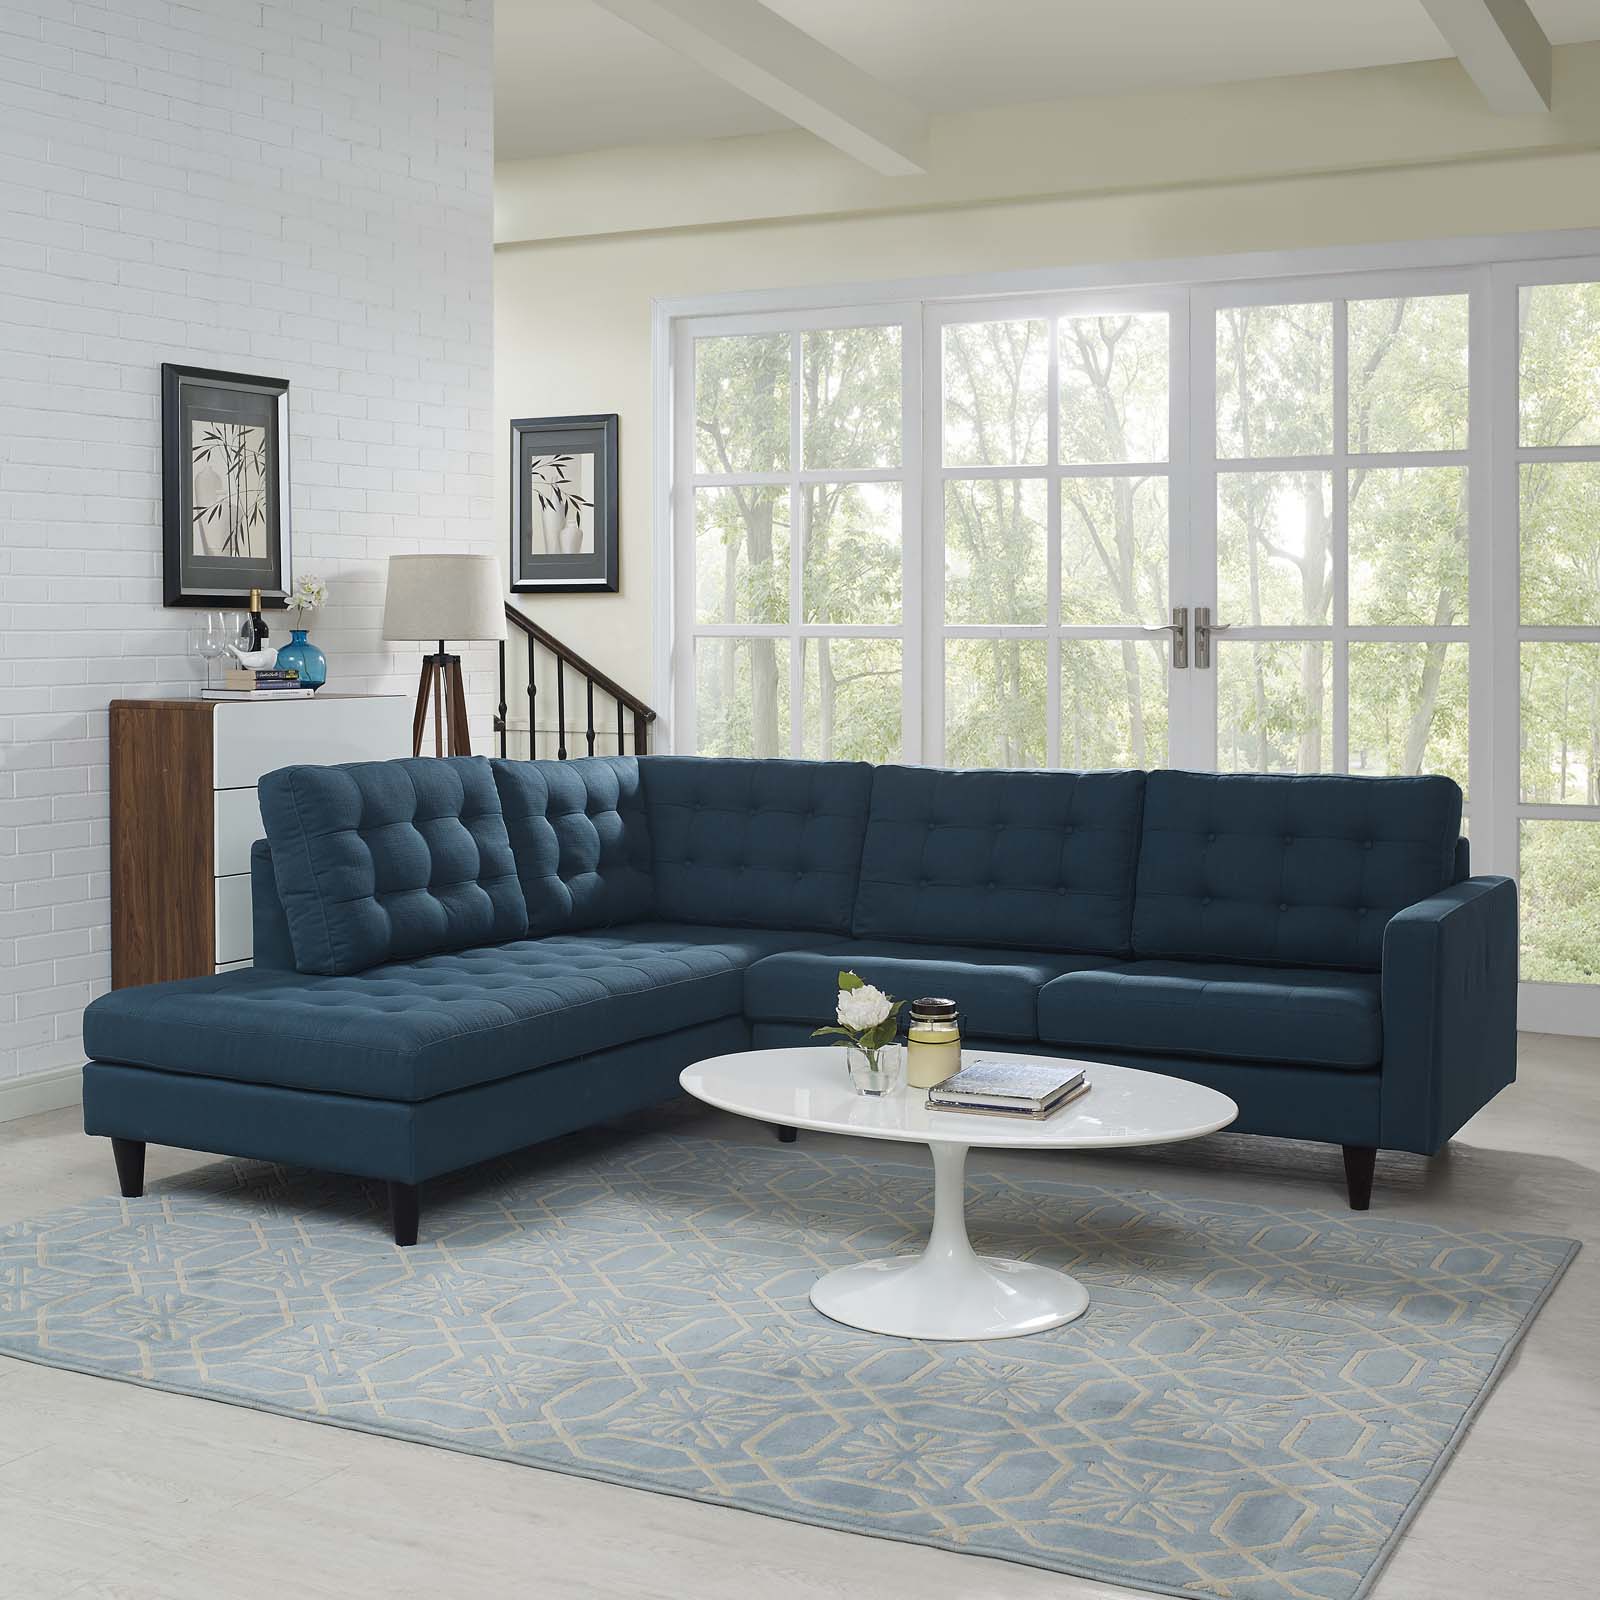 Modway Sectional Sofas - Empress 2 Piece Upholstered Fabric Left Facing Bumper Sectional Azure